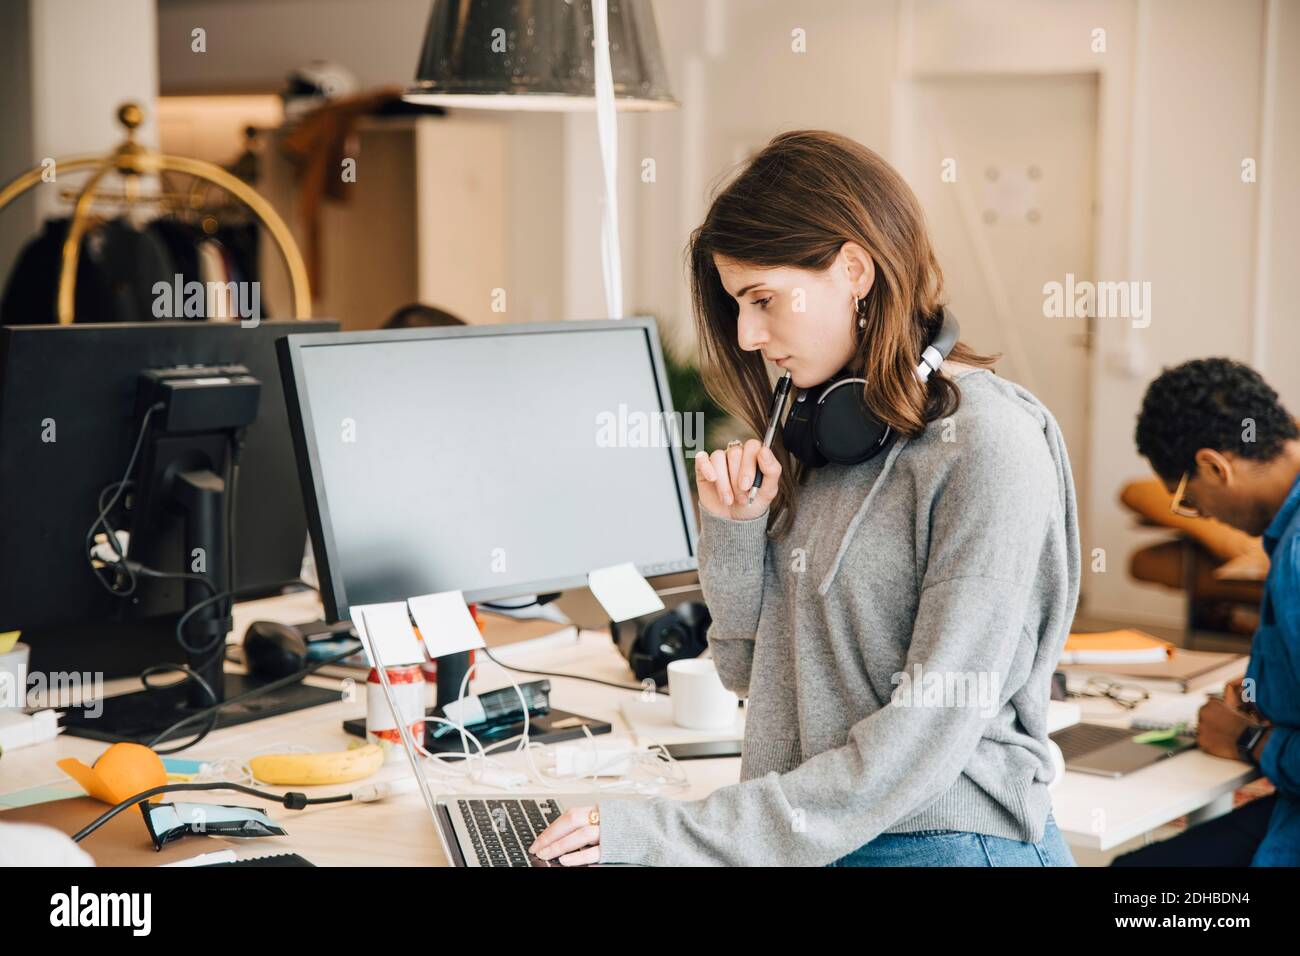 Female computer programmer analyzing data on laptop at desk in office Stock Photo